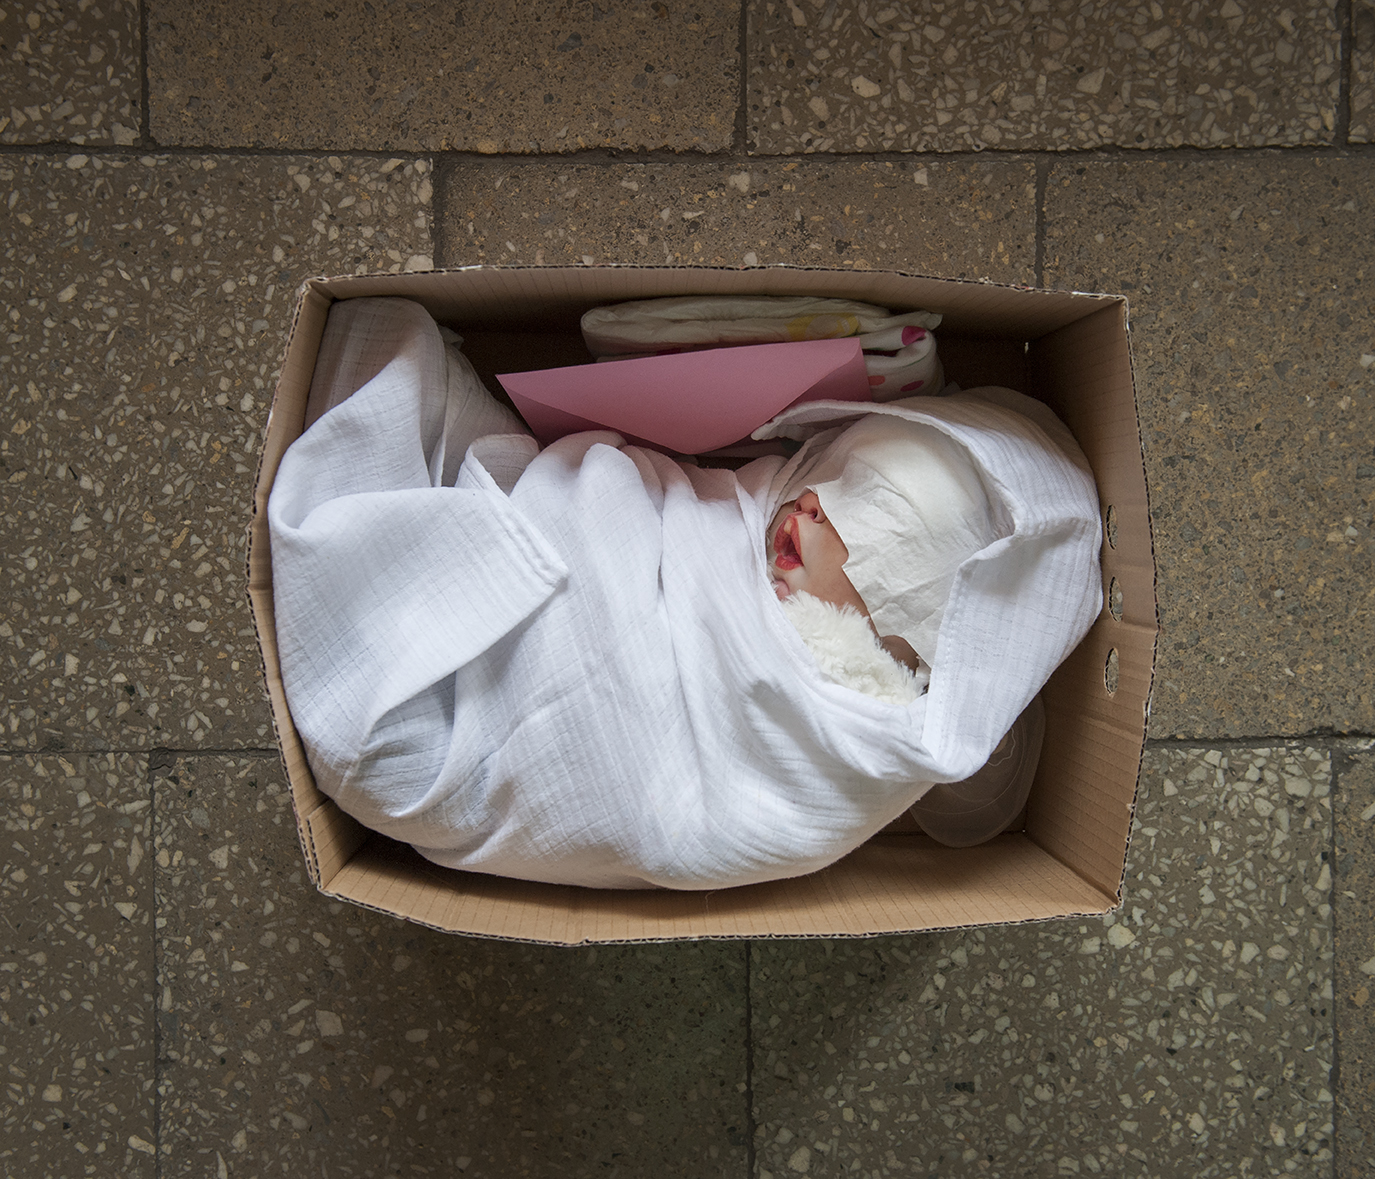  The new reborn doll is packed and ready to be sent to a new "mummy". The package includes a birth certificate and layette. The box opening ritual is very important for new doll owners. Many women film this moment and share it on YouTube and reborn d